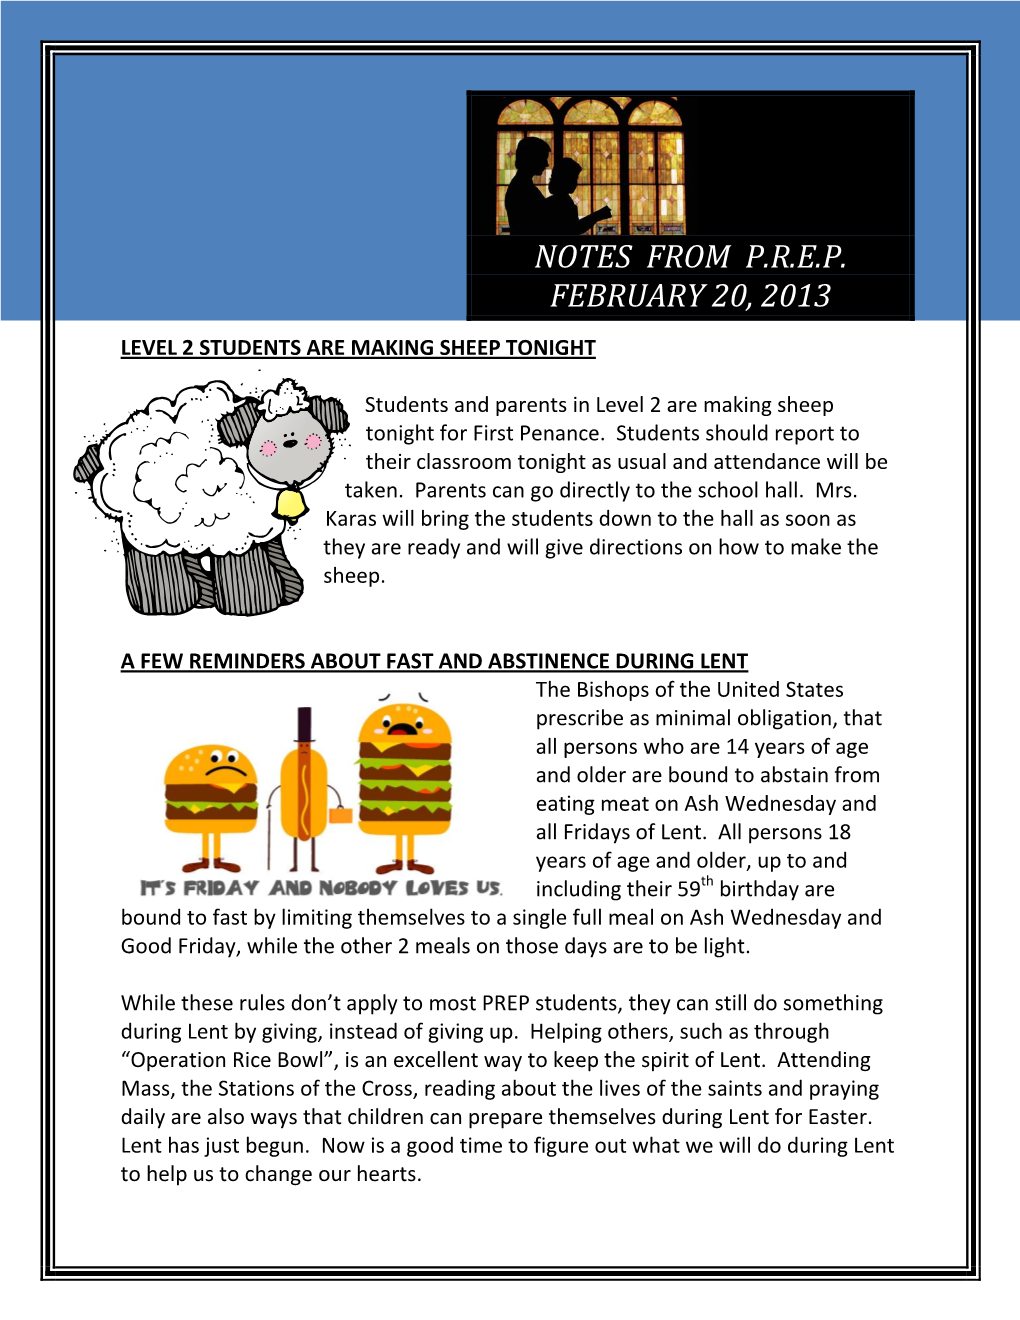 Notes from Prep February 20, 2013